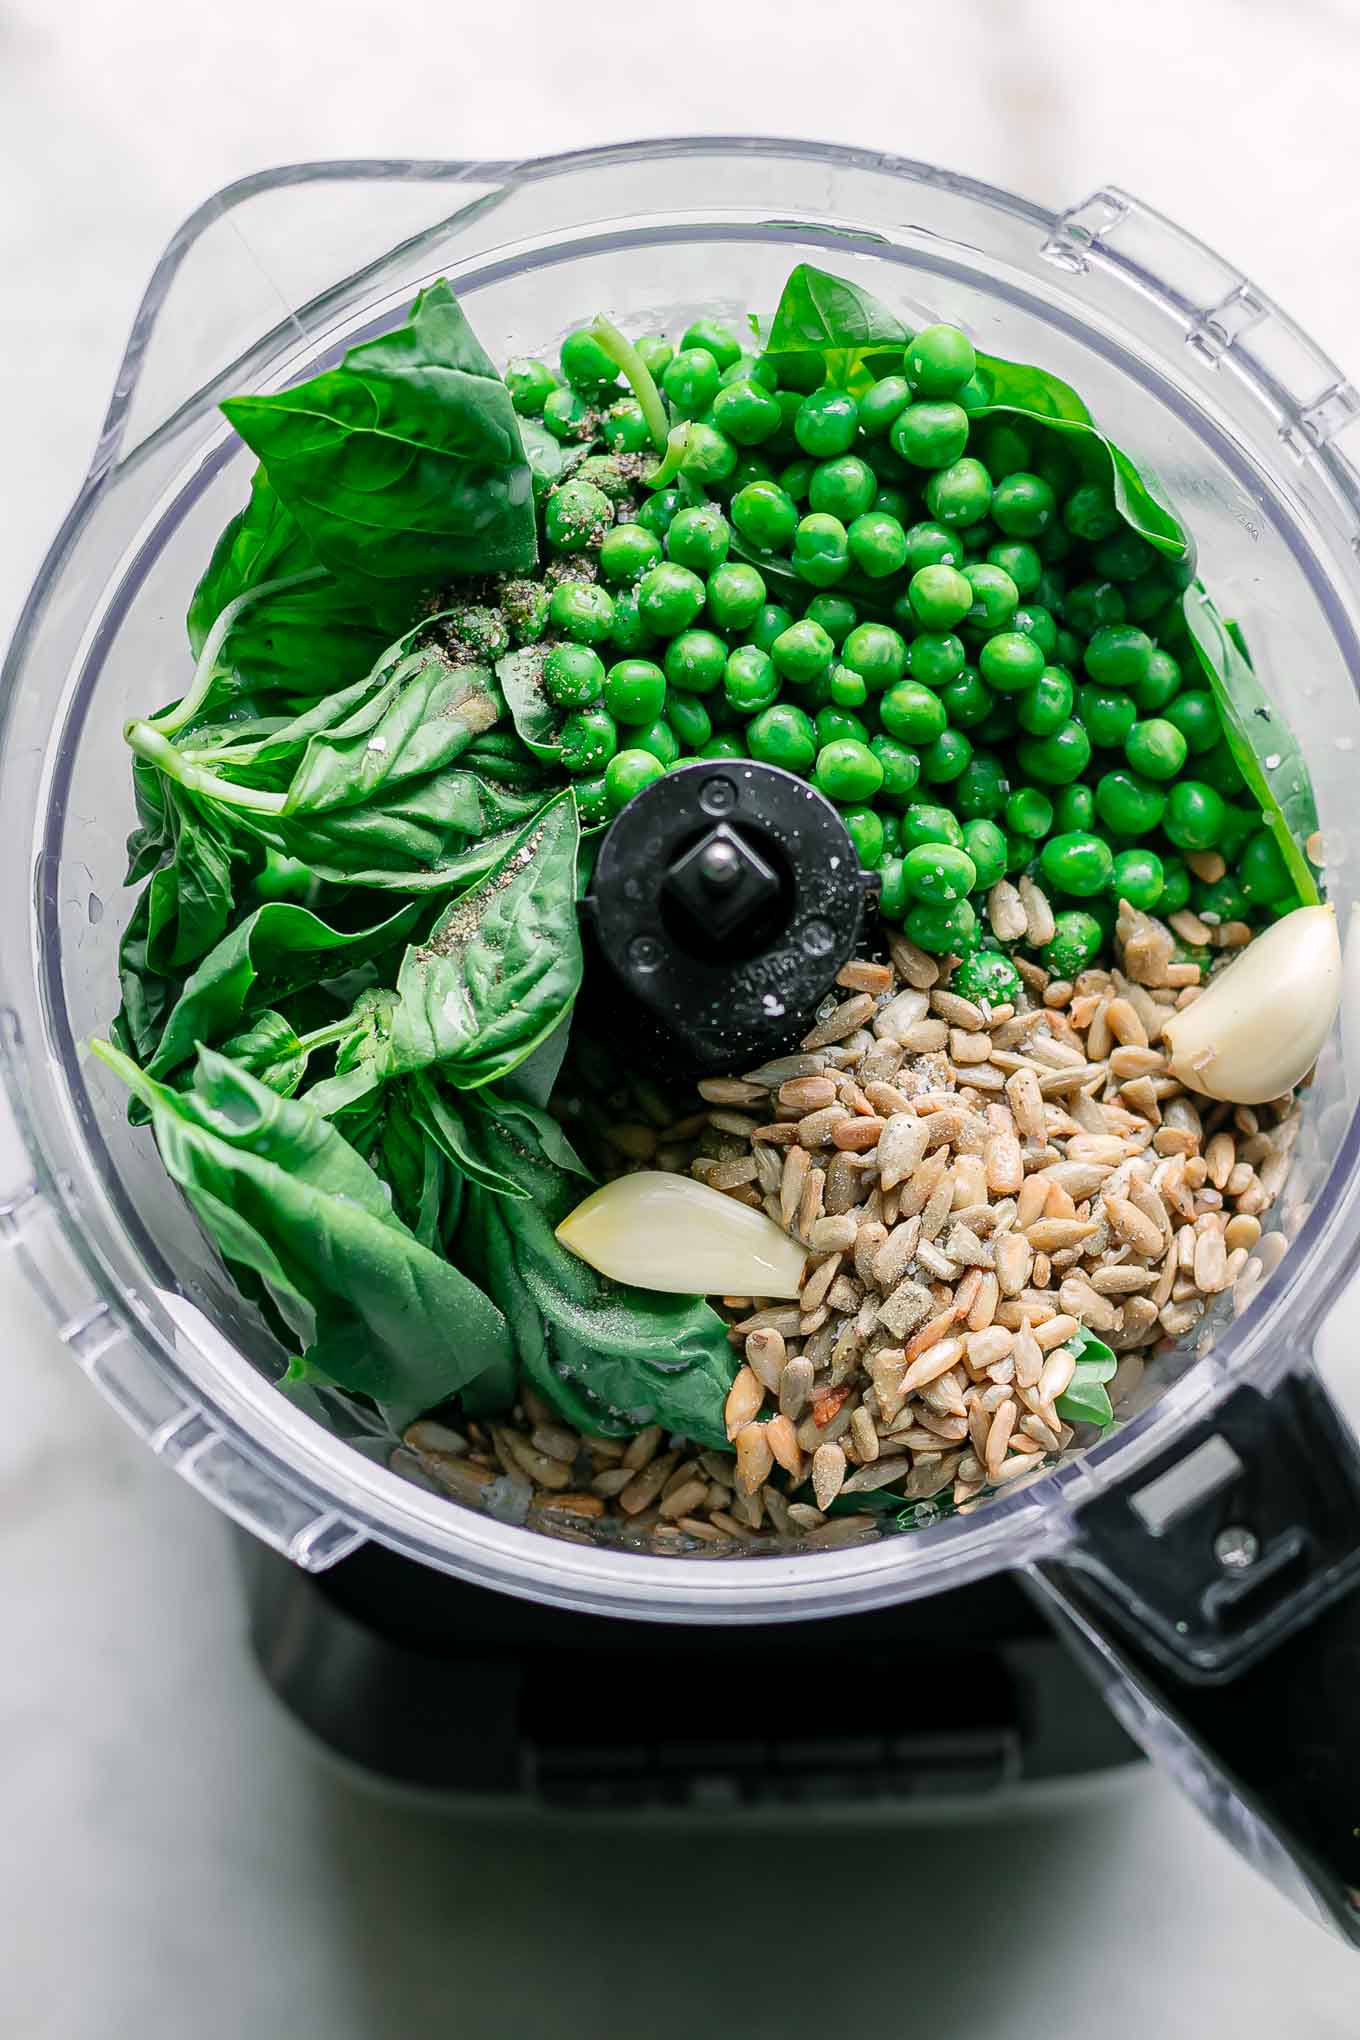 peas, basil, nuts, garlic, and other ingredients for pesto inside a food processor before blending